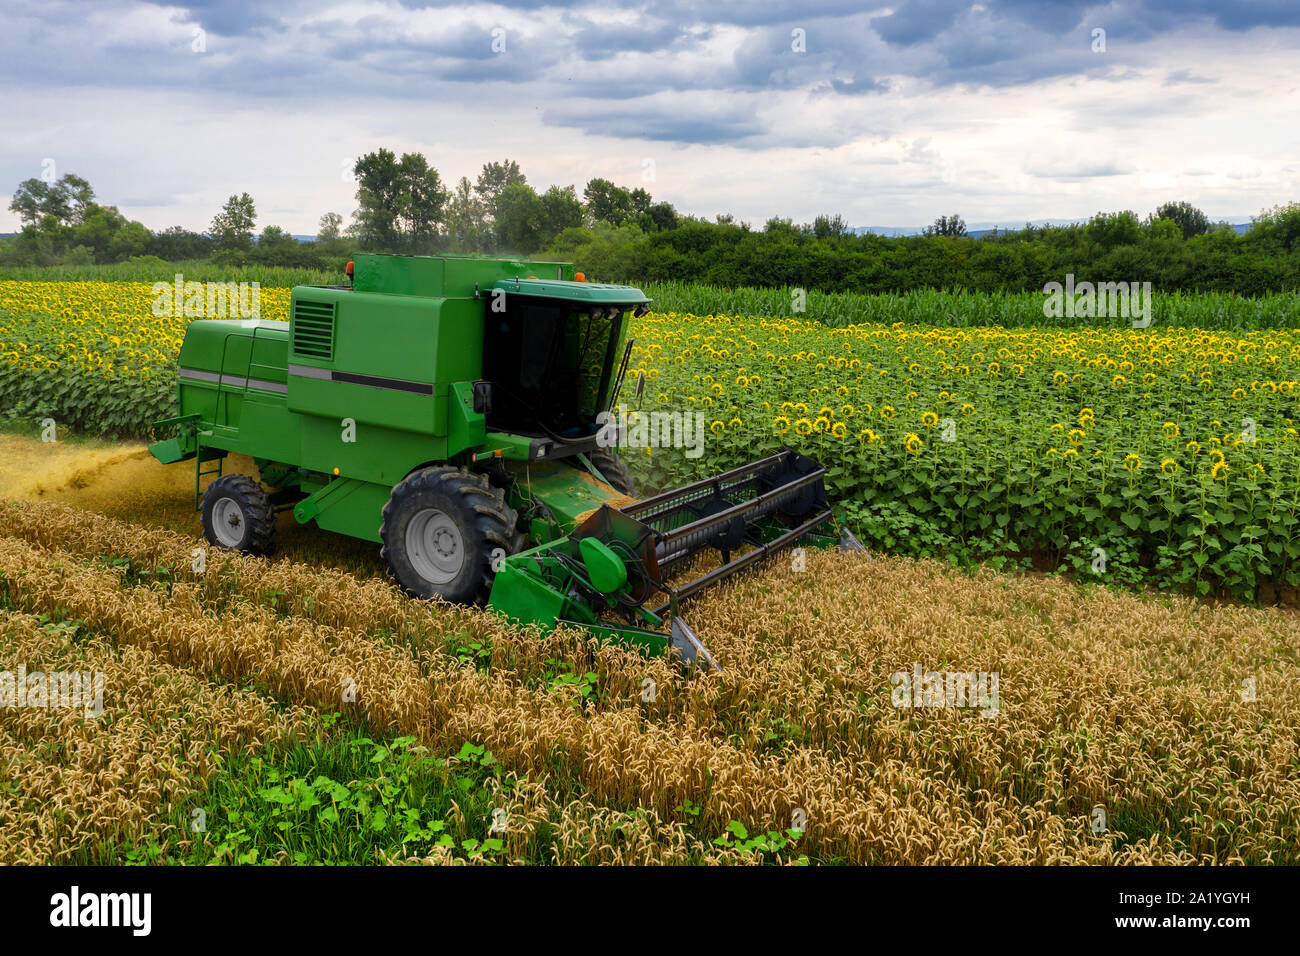 Combine harvester on a wheat field with blue sky, drone aerial view Stock Photo